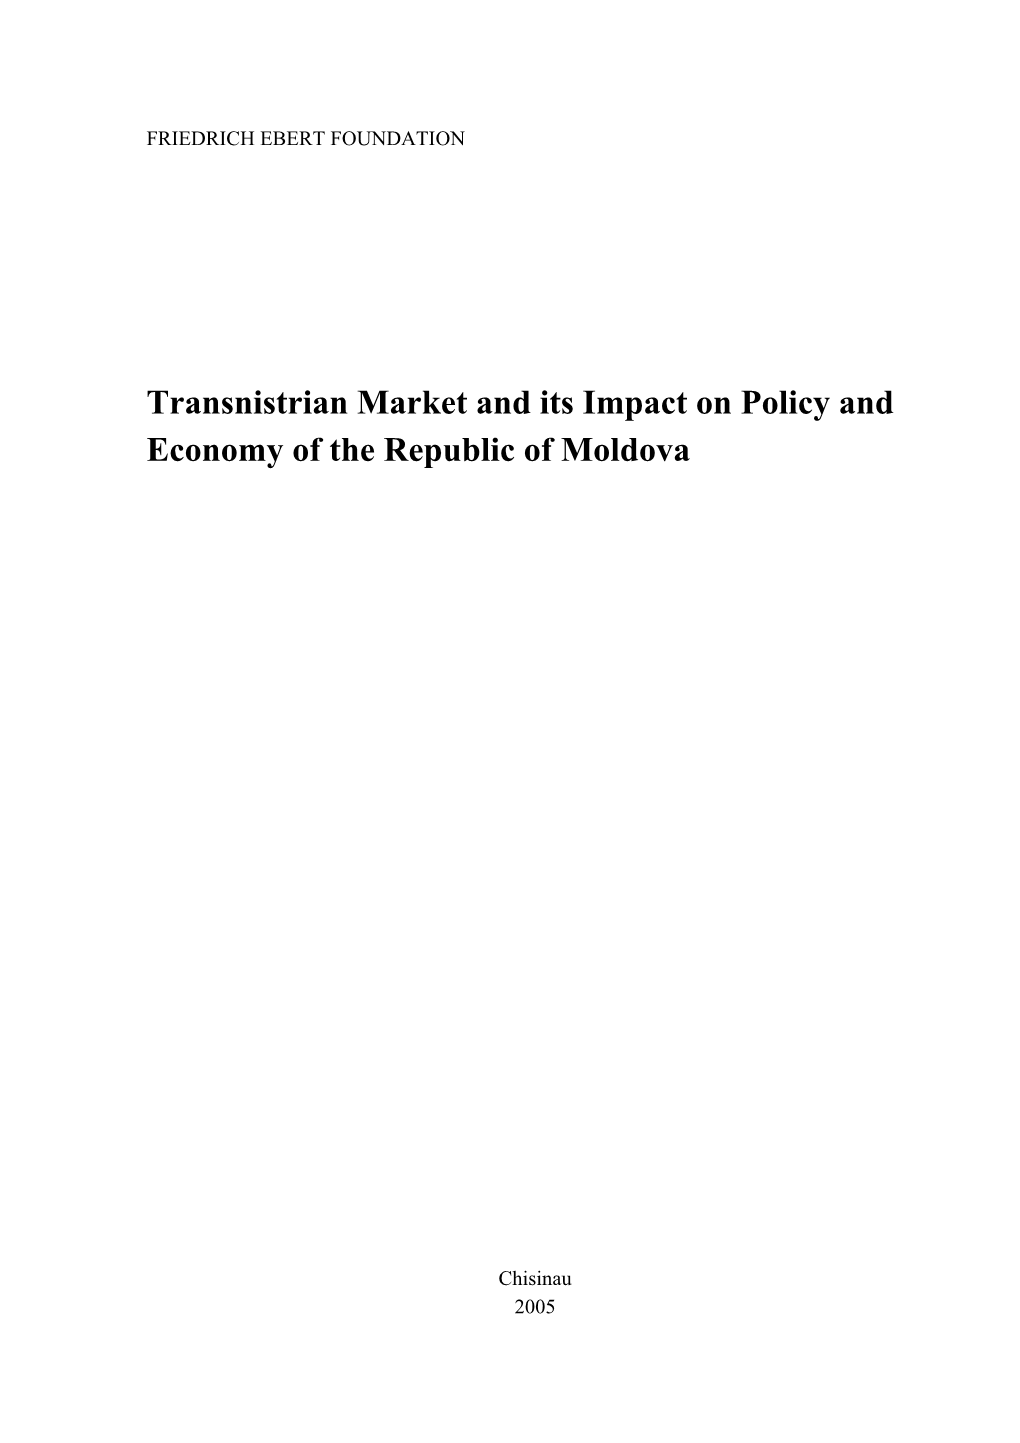 Transnistrian Market and Its Impact on Policy and Economy of the Republic of Moldova